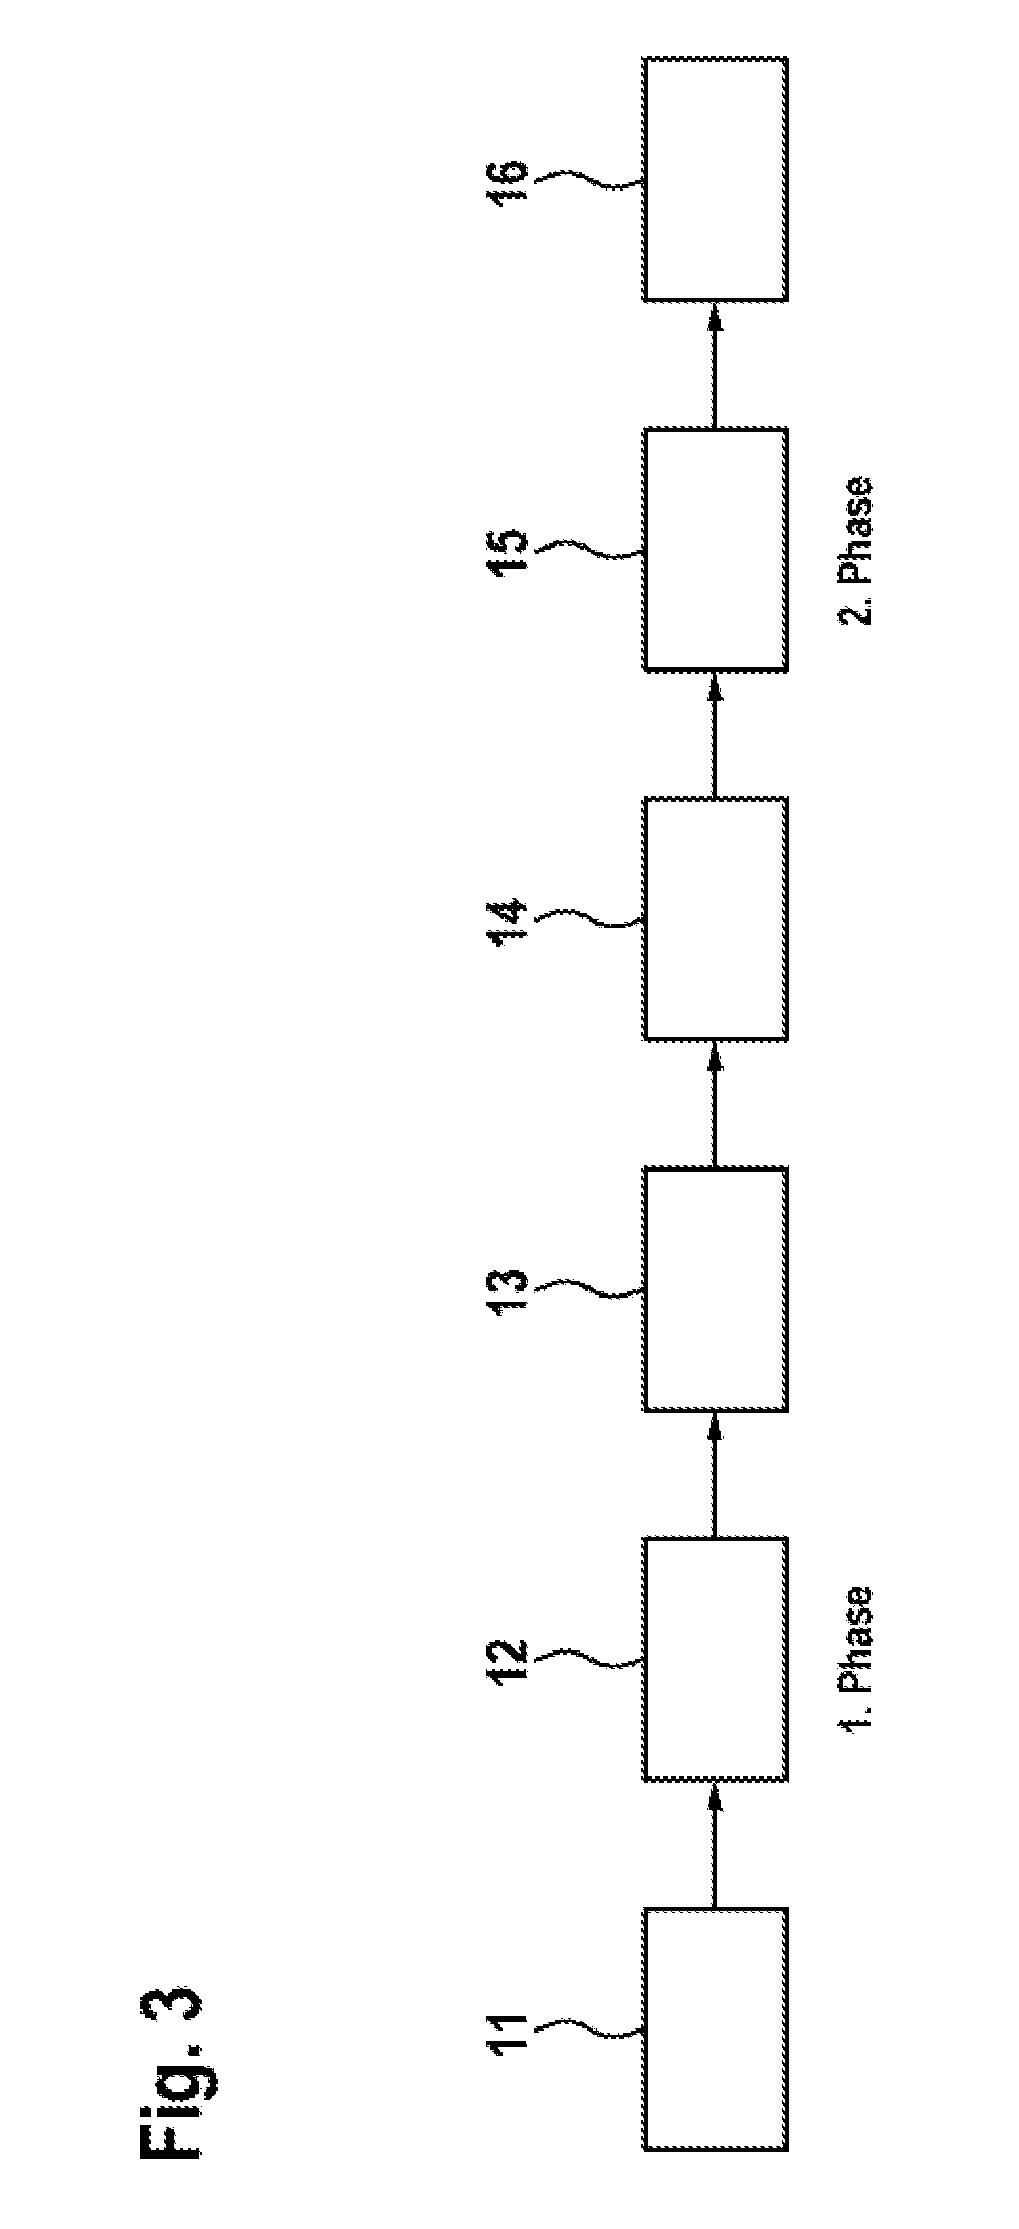 Bidirectional dc/dc converter and method for charging the intermediate circuit capacitor of a dc/dc converter from the low-voltage battery